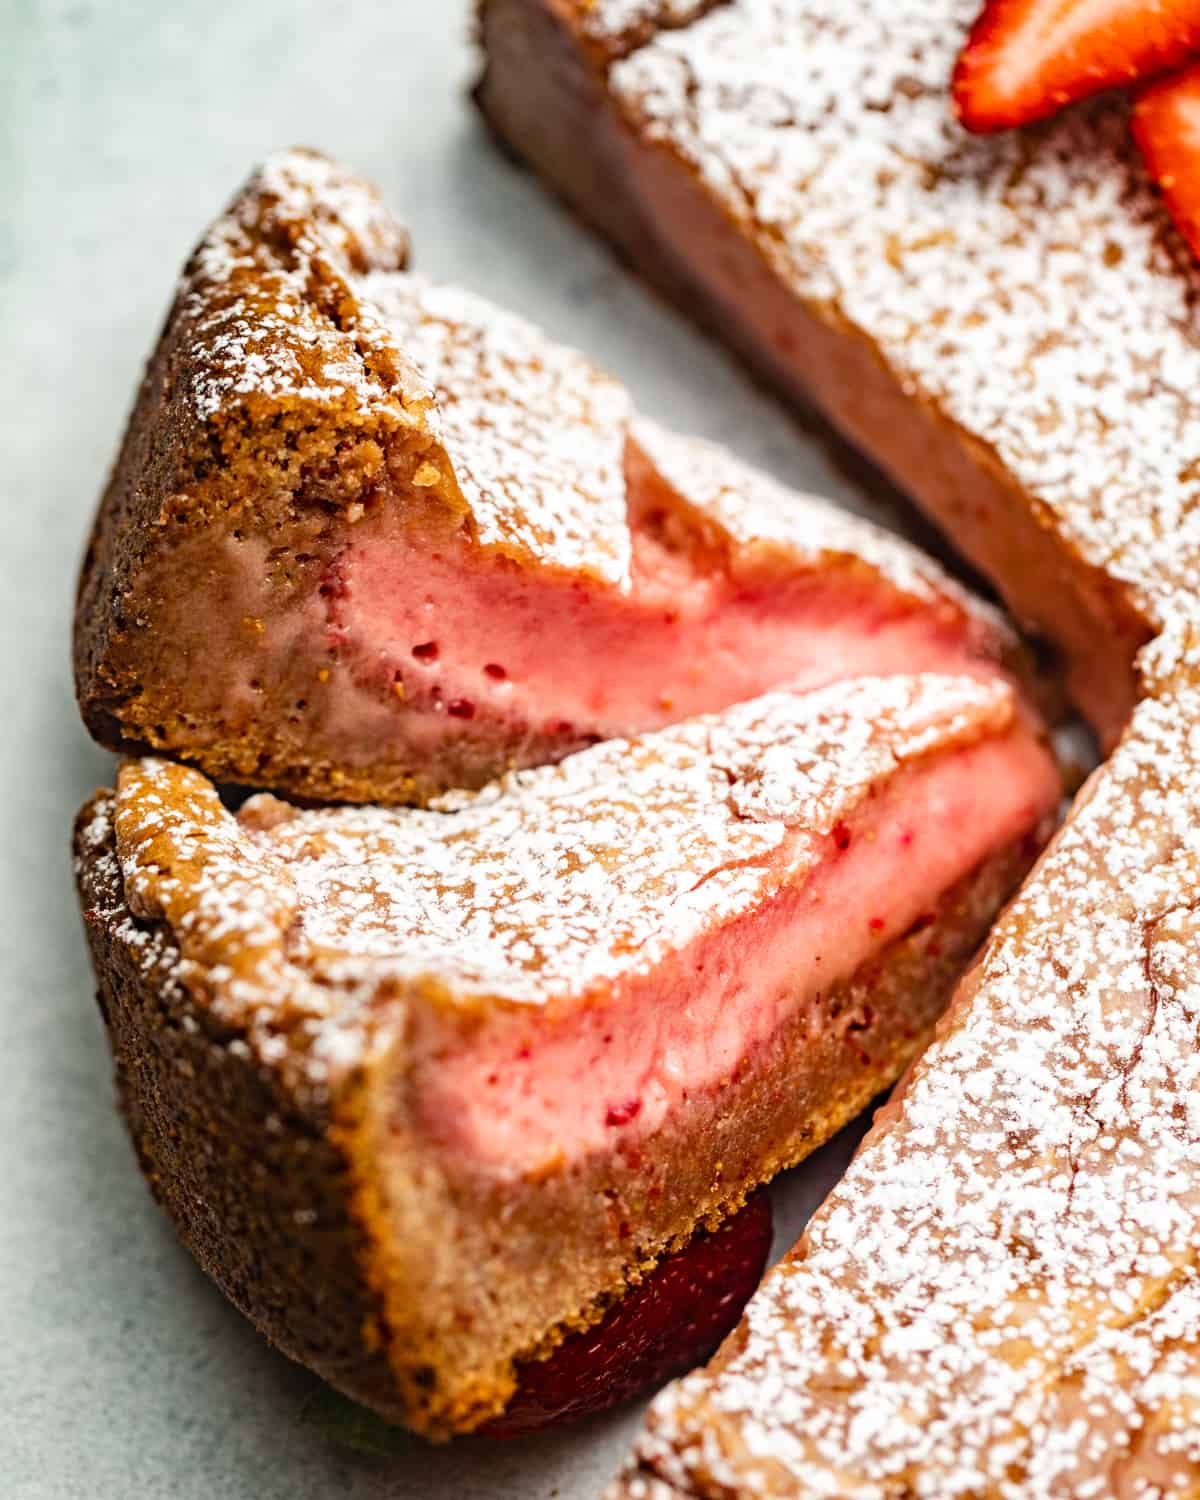 strawberry cake slices cut and placed on their side.